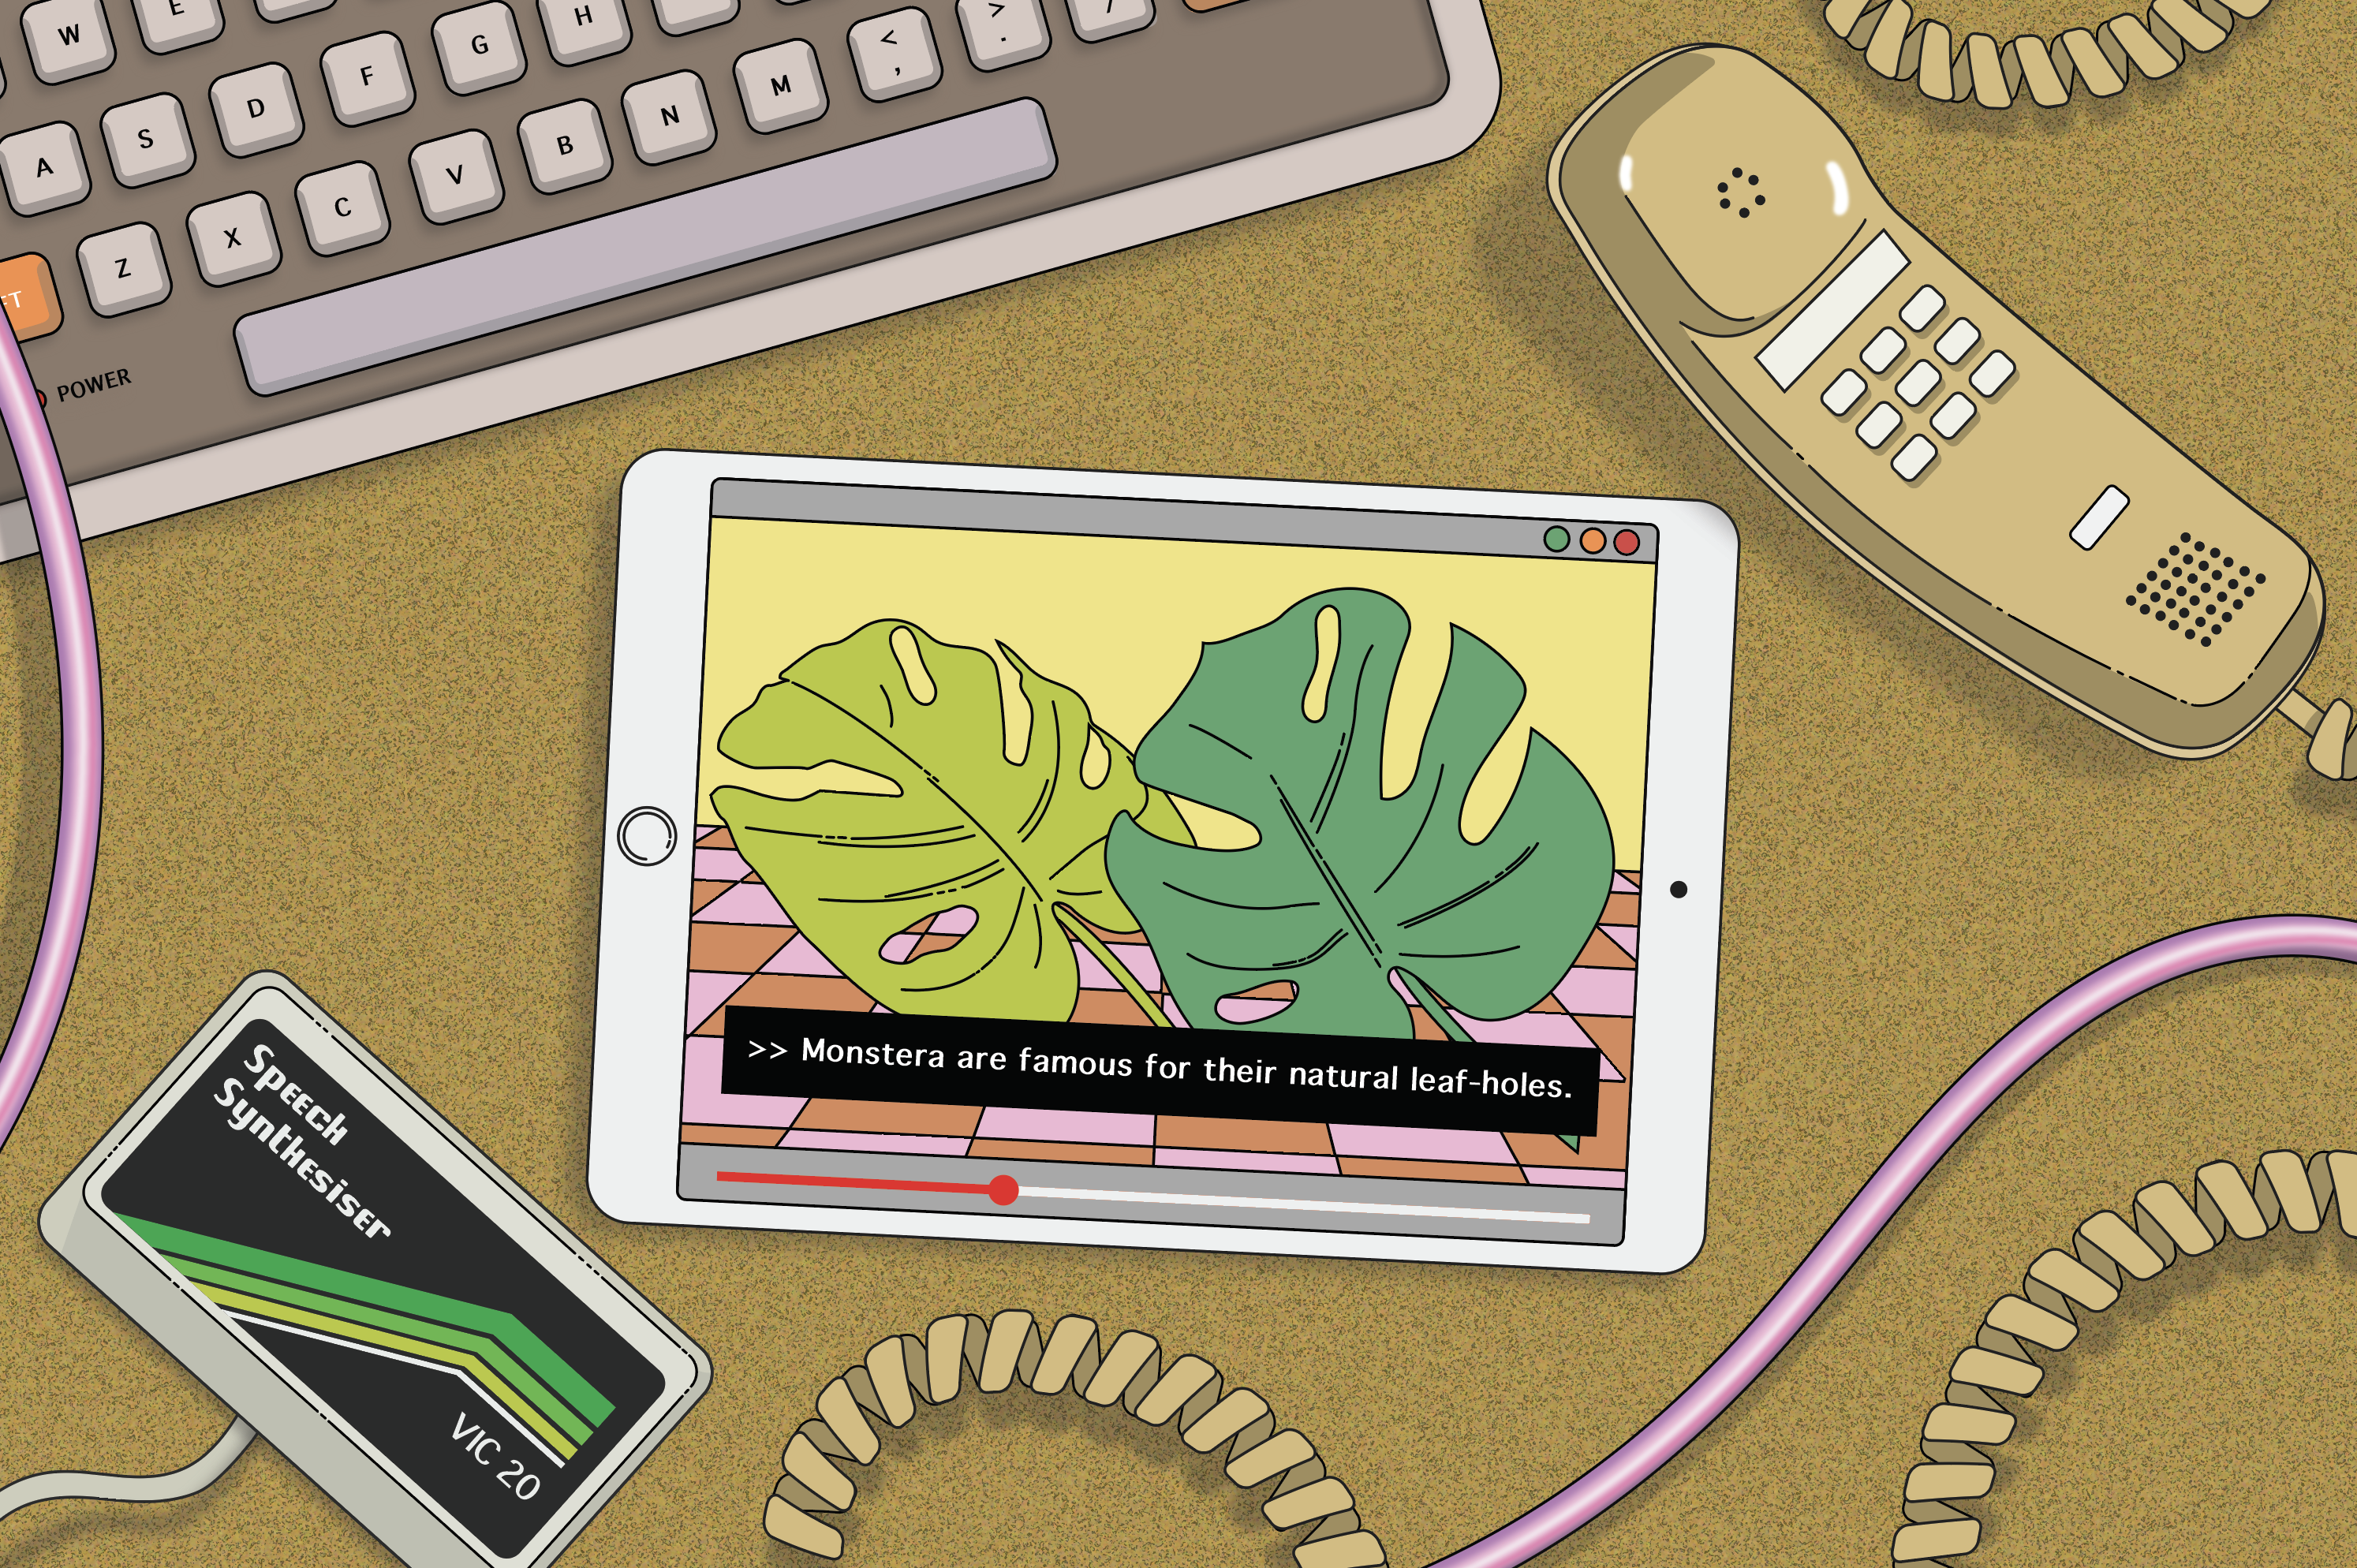 An illustration of a keyboard, telephone, a tablet with captions displaying, and a speech synthesizer on a desk.